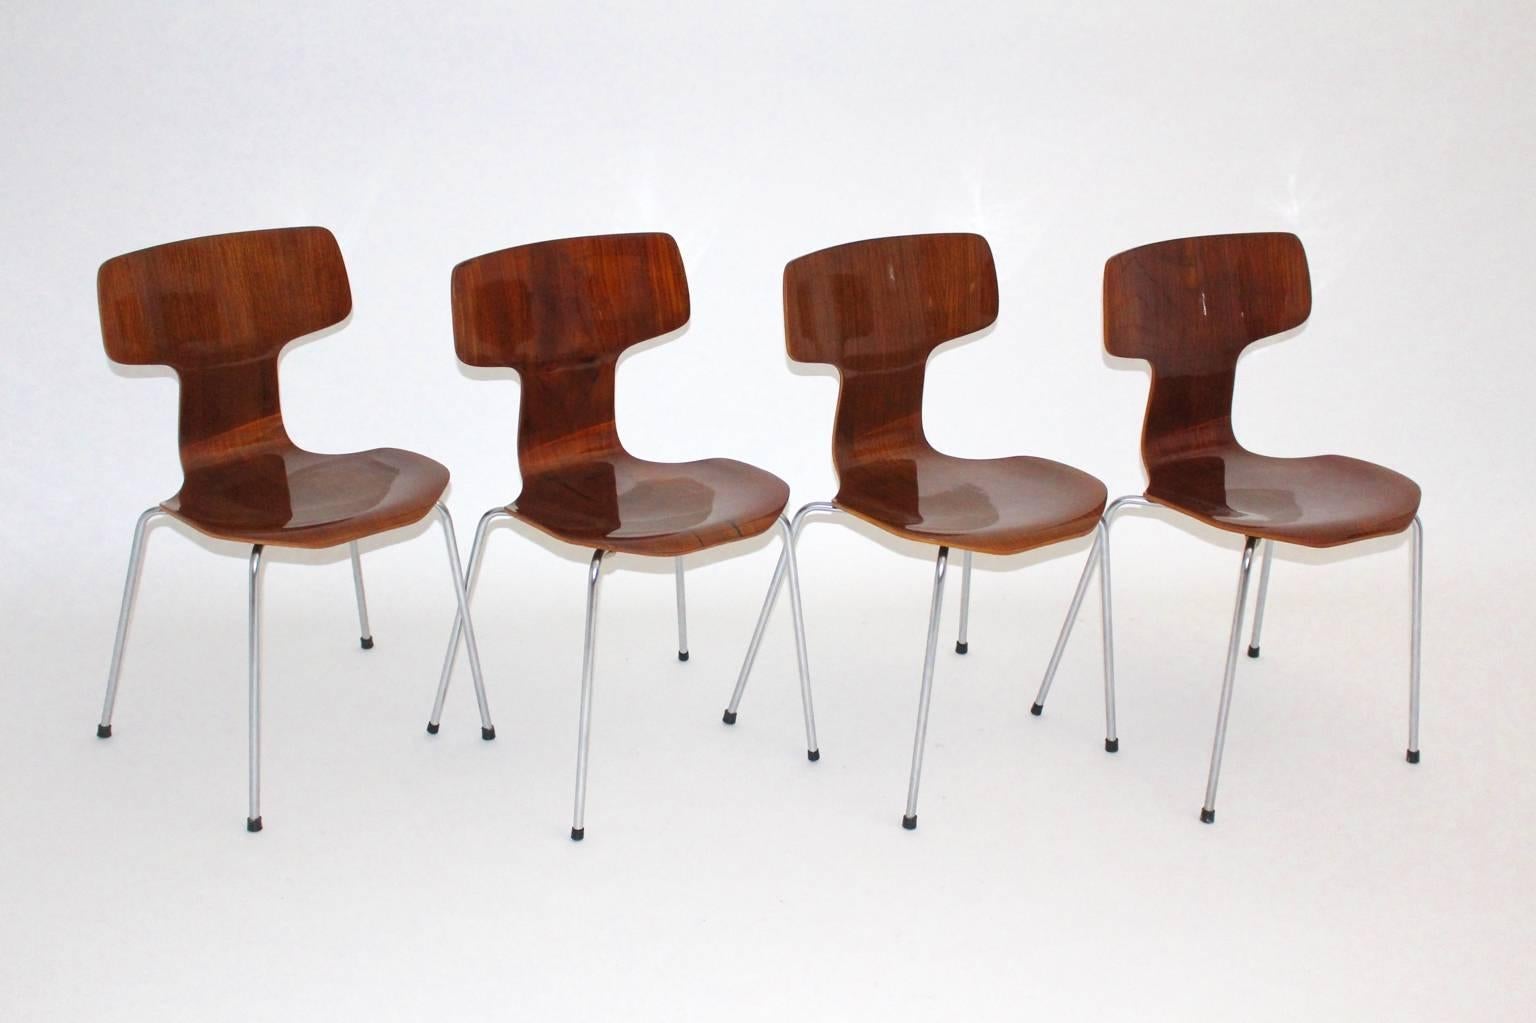 Mid Century Modern four plywood teak Model No. 3103 laminated rare stacking chairs, designed 1952 and just produced for 15 years only.
Carefully cleaned and hand-polished.
The iconic set of 4 dining chairs or chairs by Arne Jacobsen works well as